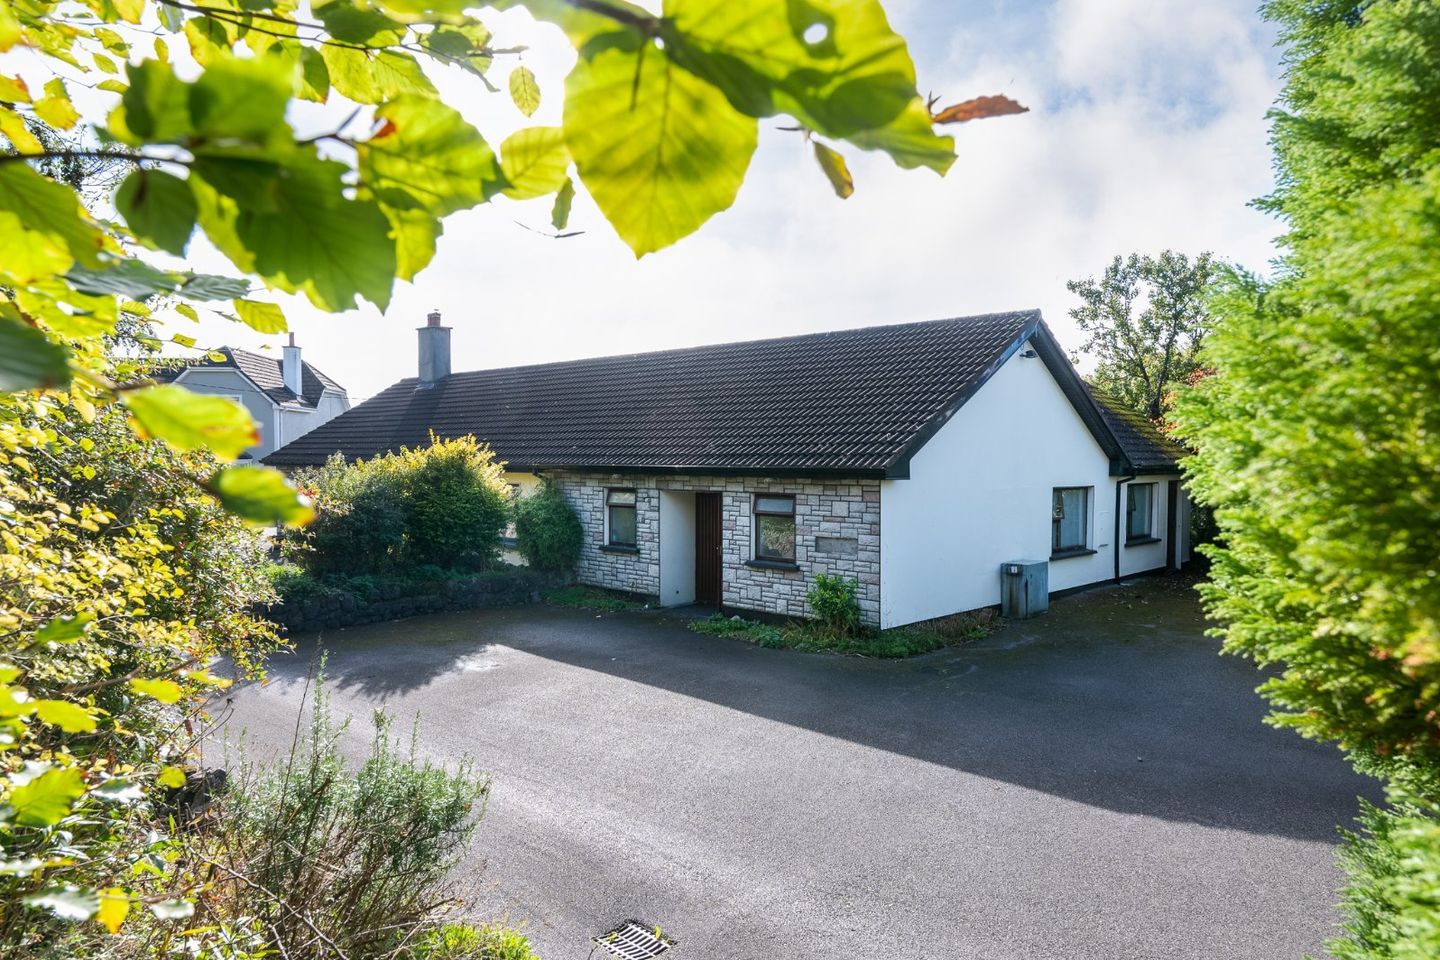 Clonminch Road, Tullamore, Co. Offaly, R35HF54